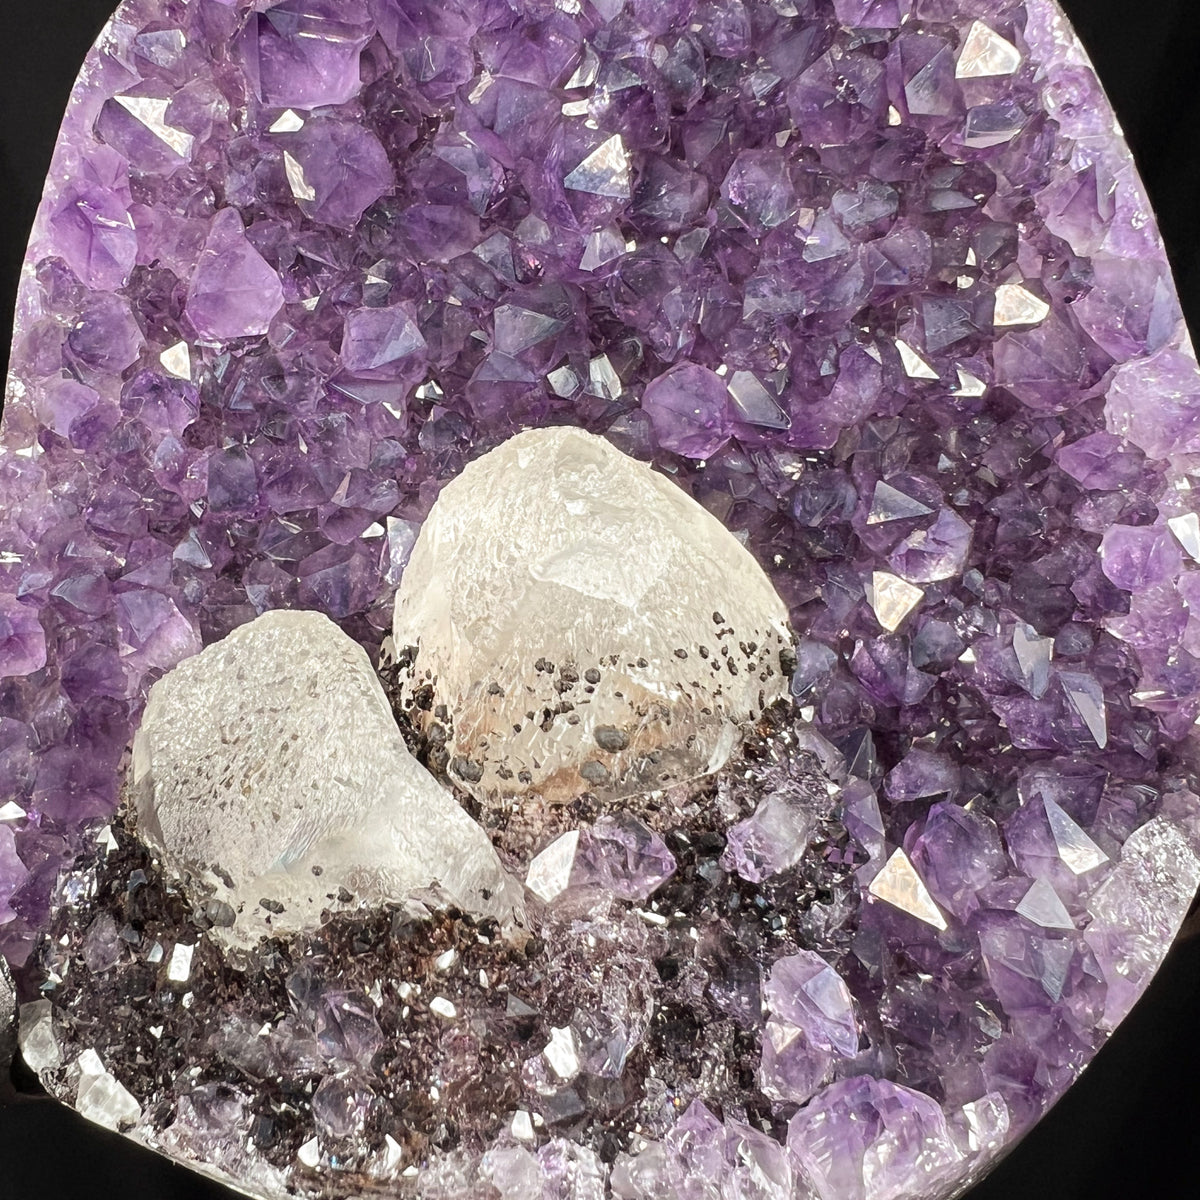 Close Up of Calcite and Hematite Crystals growing inside Amethyst geode